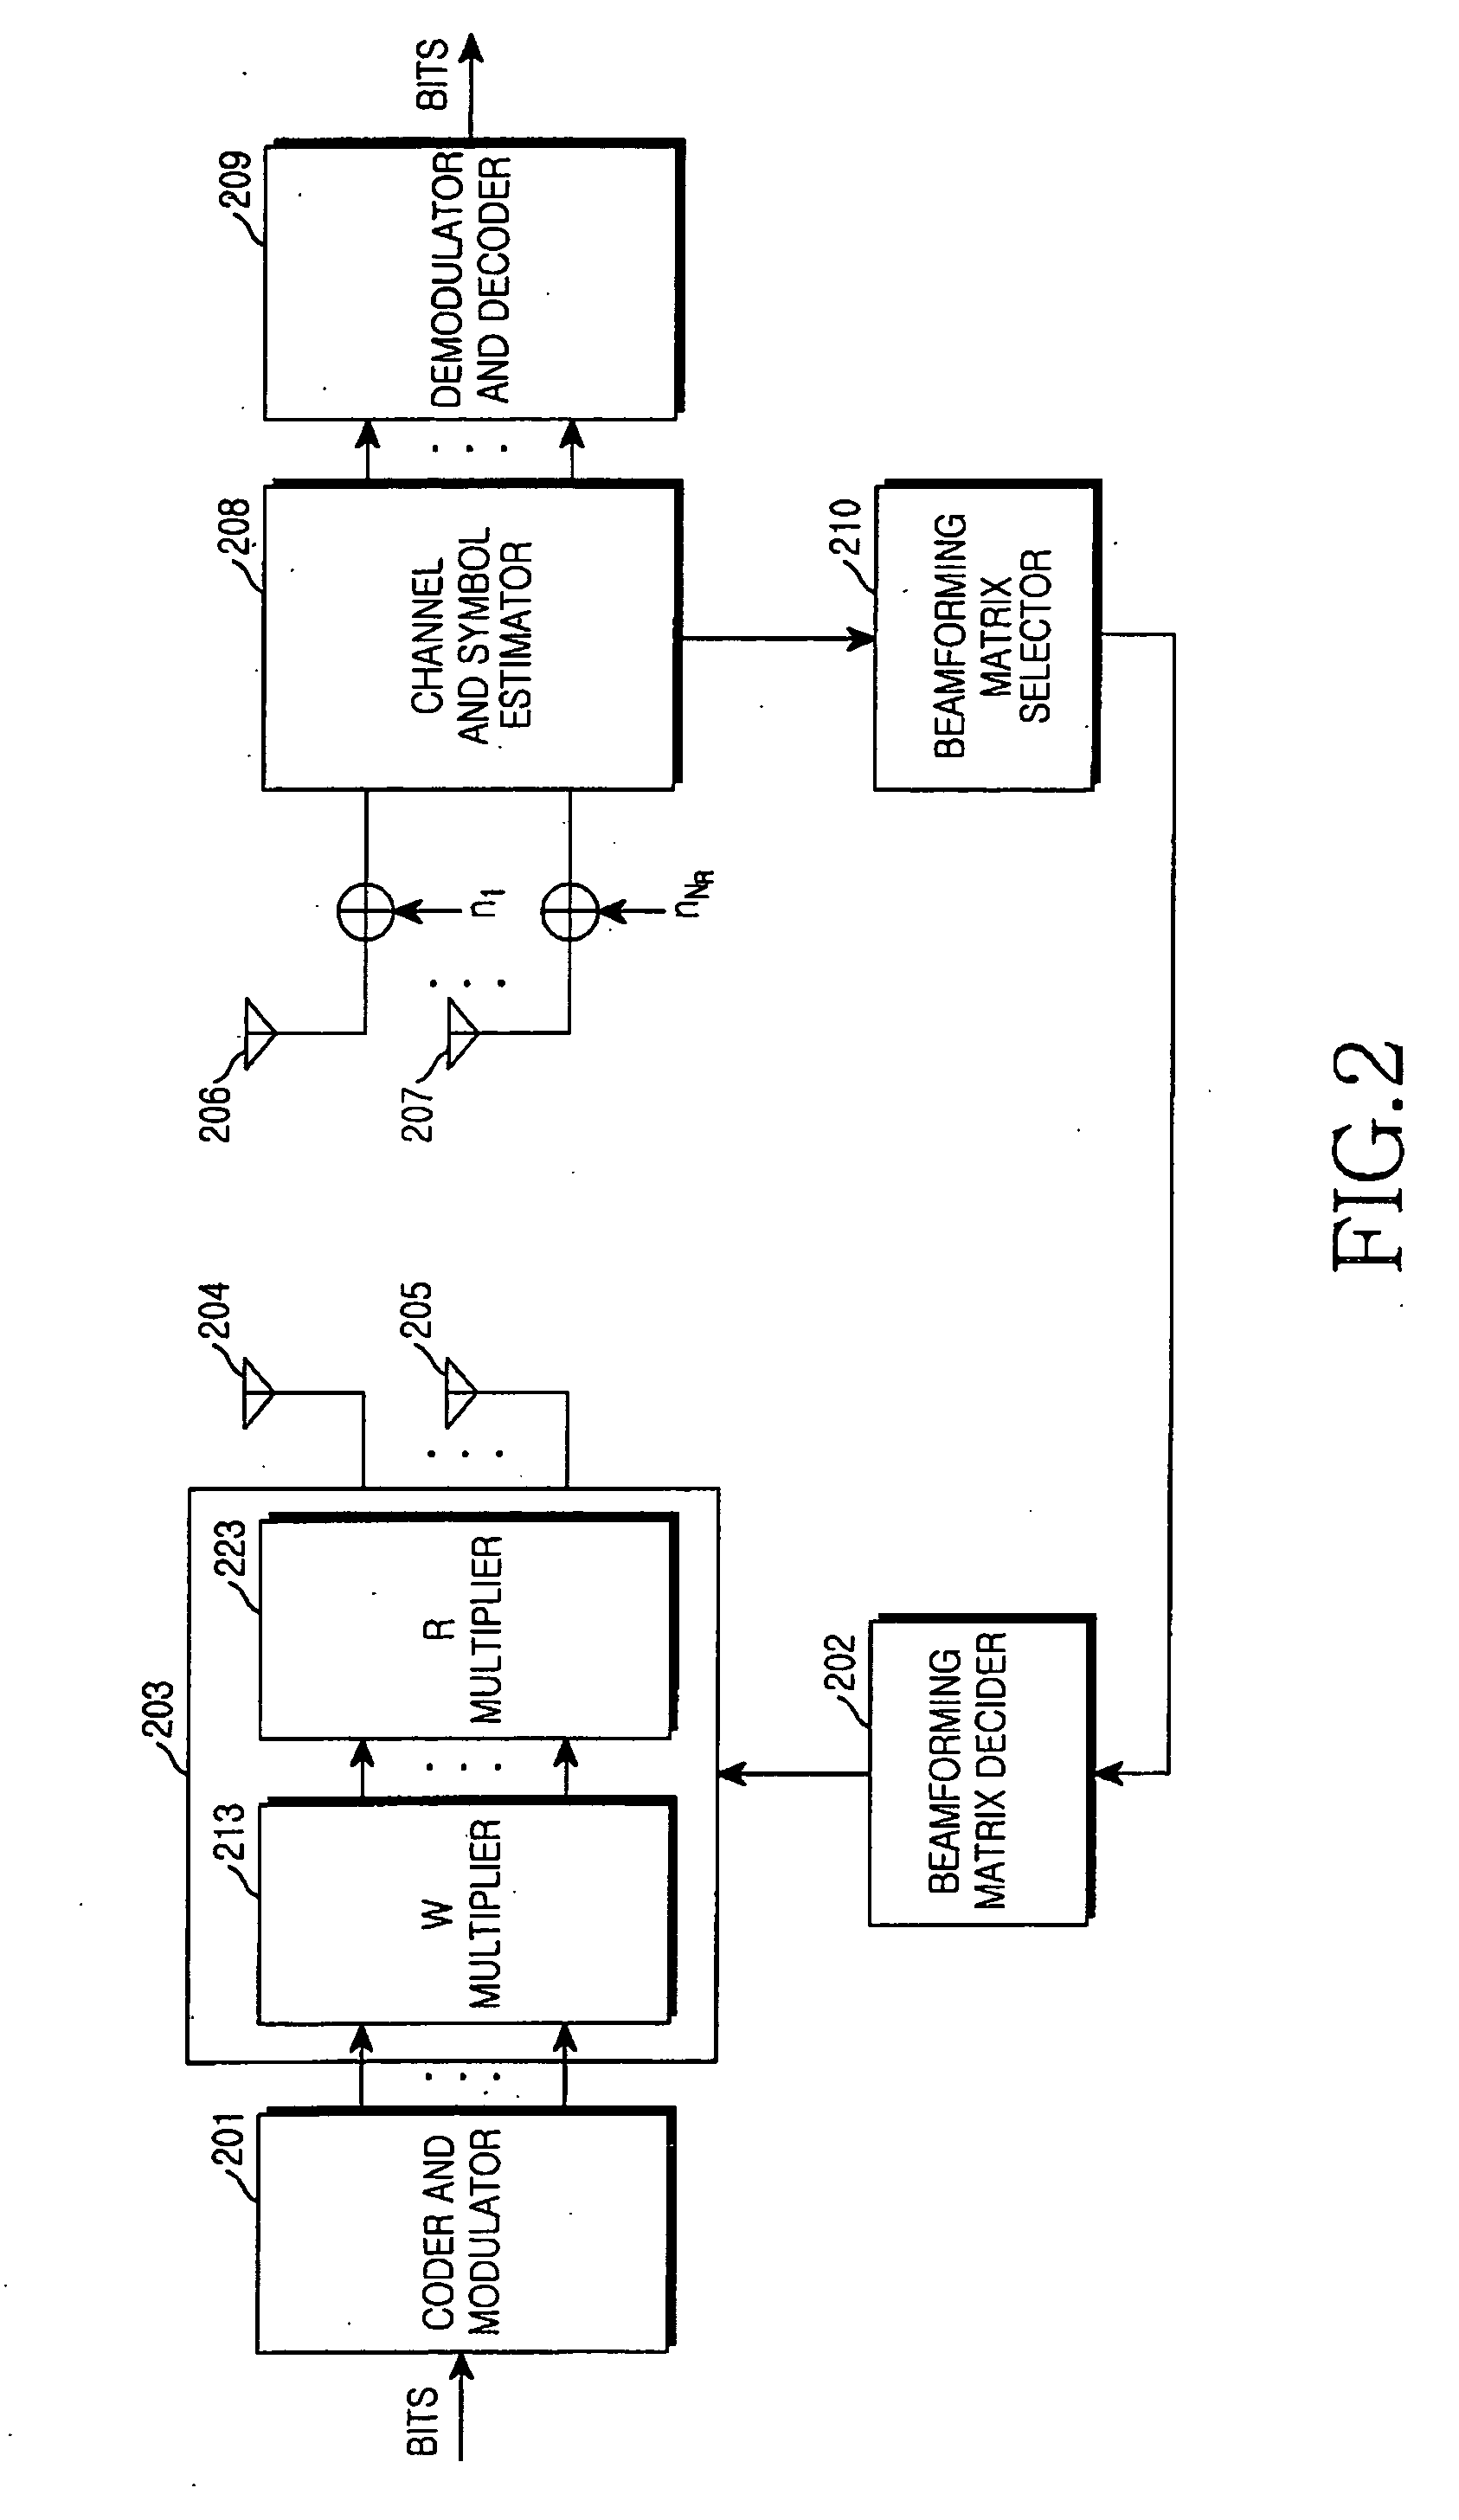 Transmitting/receiving apparatus and method in a closed-loop MIMO system